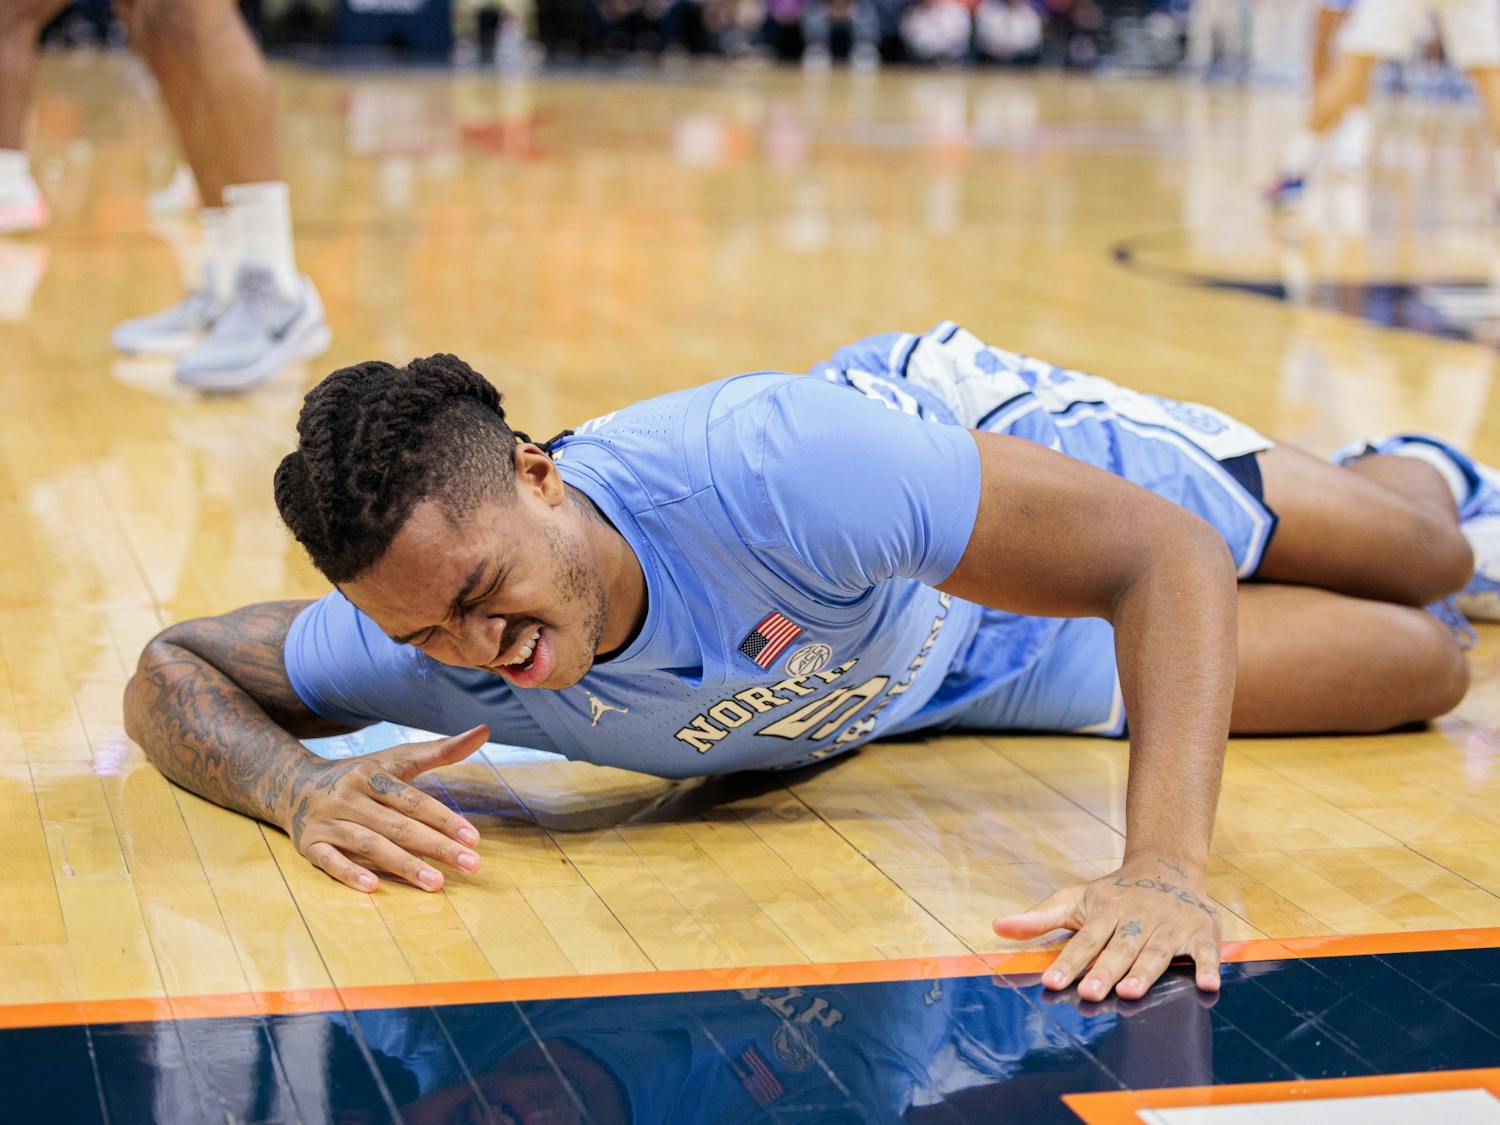 UNC senior Armando Bacot (5) goes down following an injury in the first half during a game against UVA at John Paul Jones Arena in Charlottesville, VA on January 10, 2023. UNC lost 65-58. Photo courtesy of Ryan Hunt.